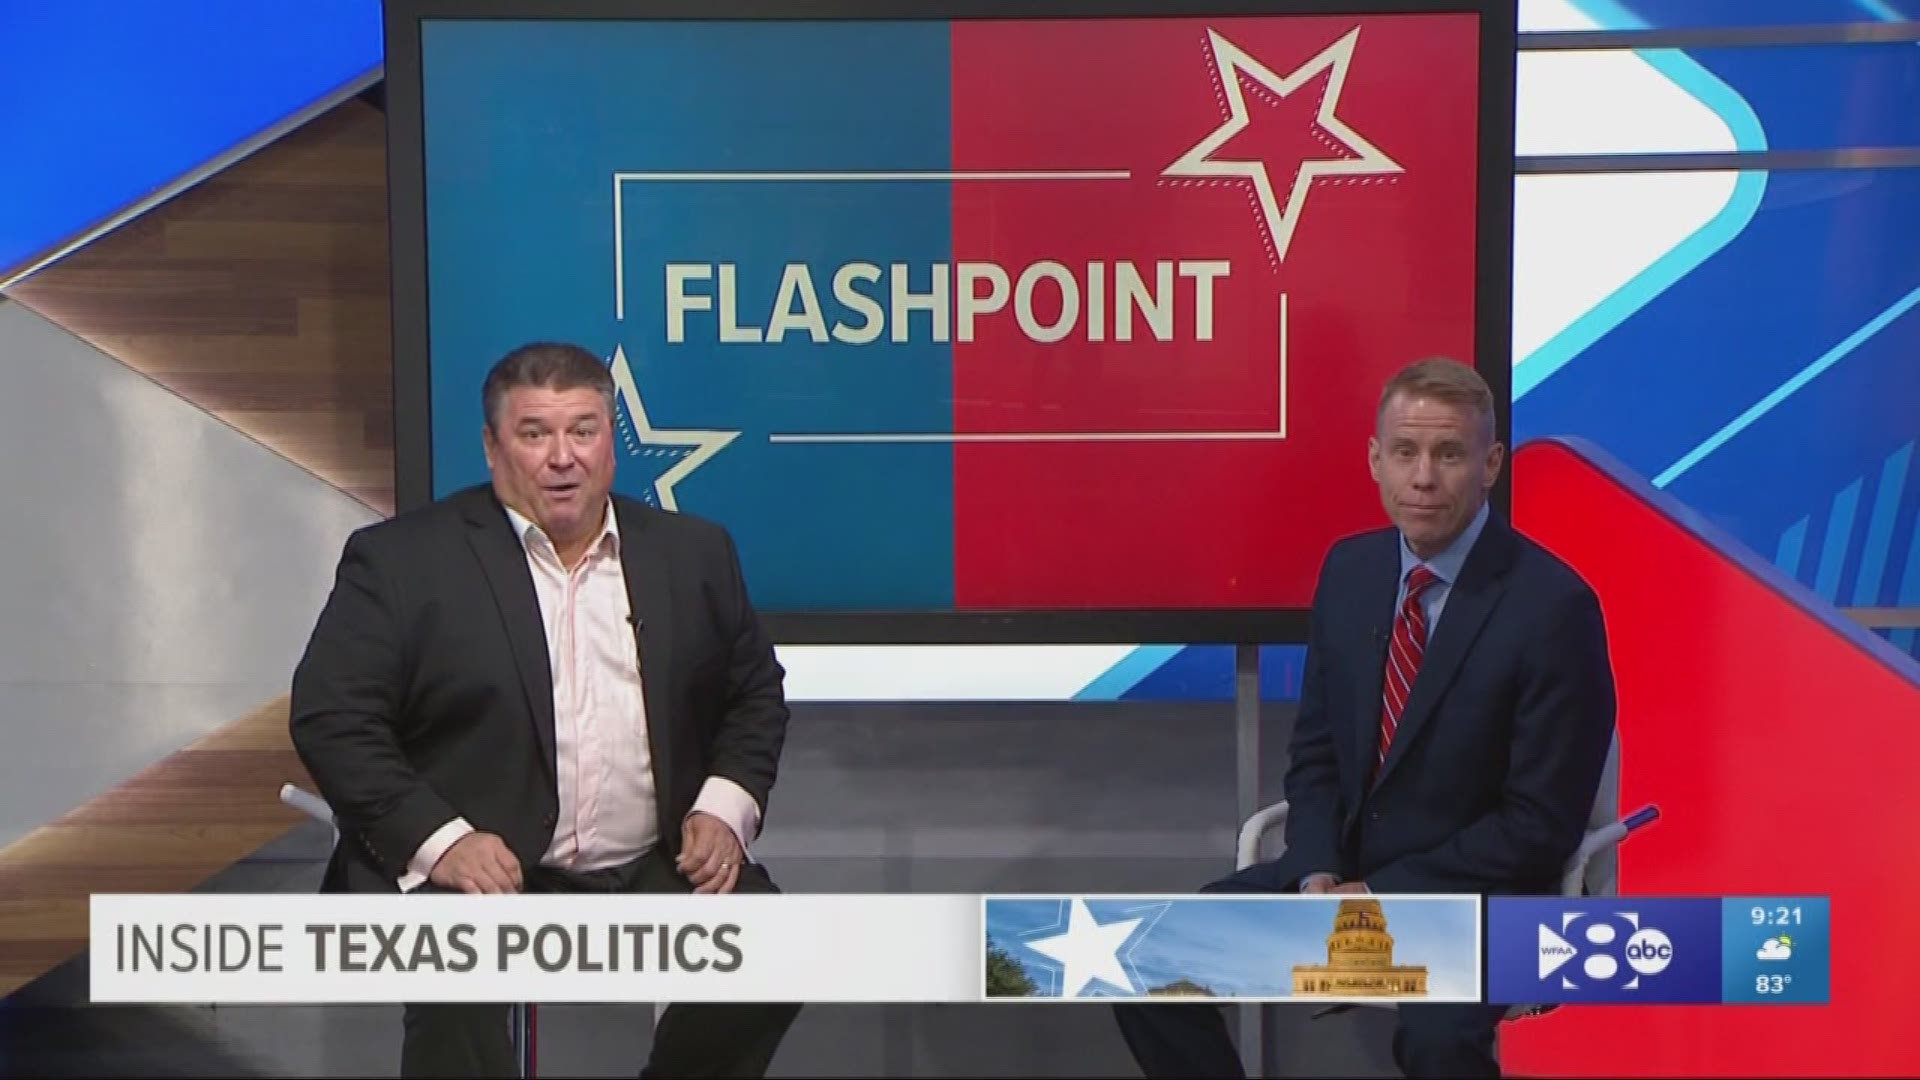 Four Texas Republican congressmen are retiring. Does this situation present a danger for Democrats? That’s this week’s Flashpoint topic. From the right, Wade Emmert, former chairman of Dallas County's Republican Party. And from the left, Rich Hancock from VirtualNewsCenter.com.